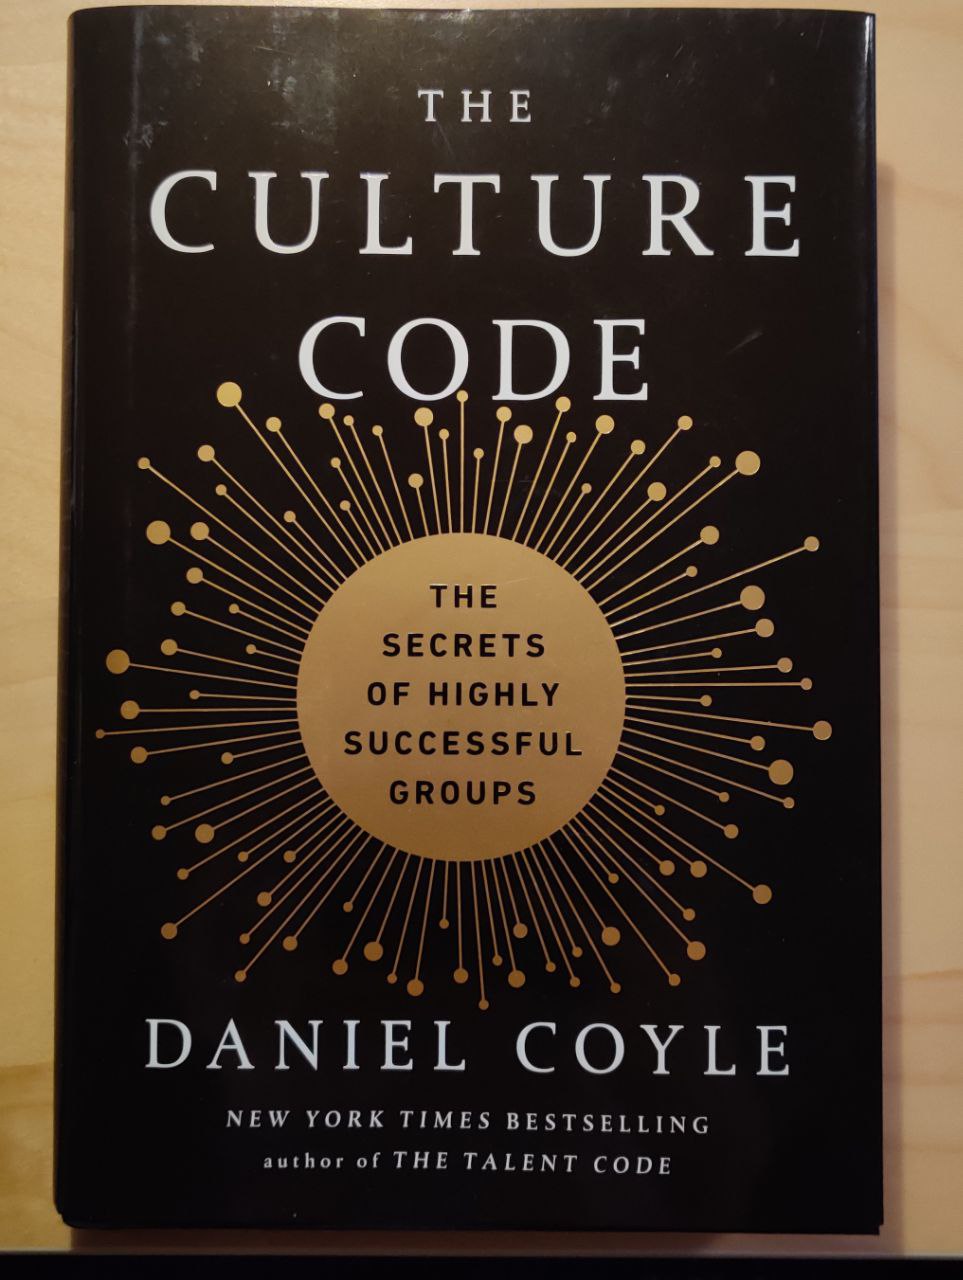 “The Culture Code” cover